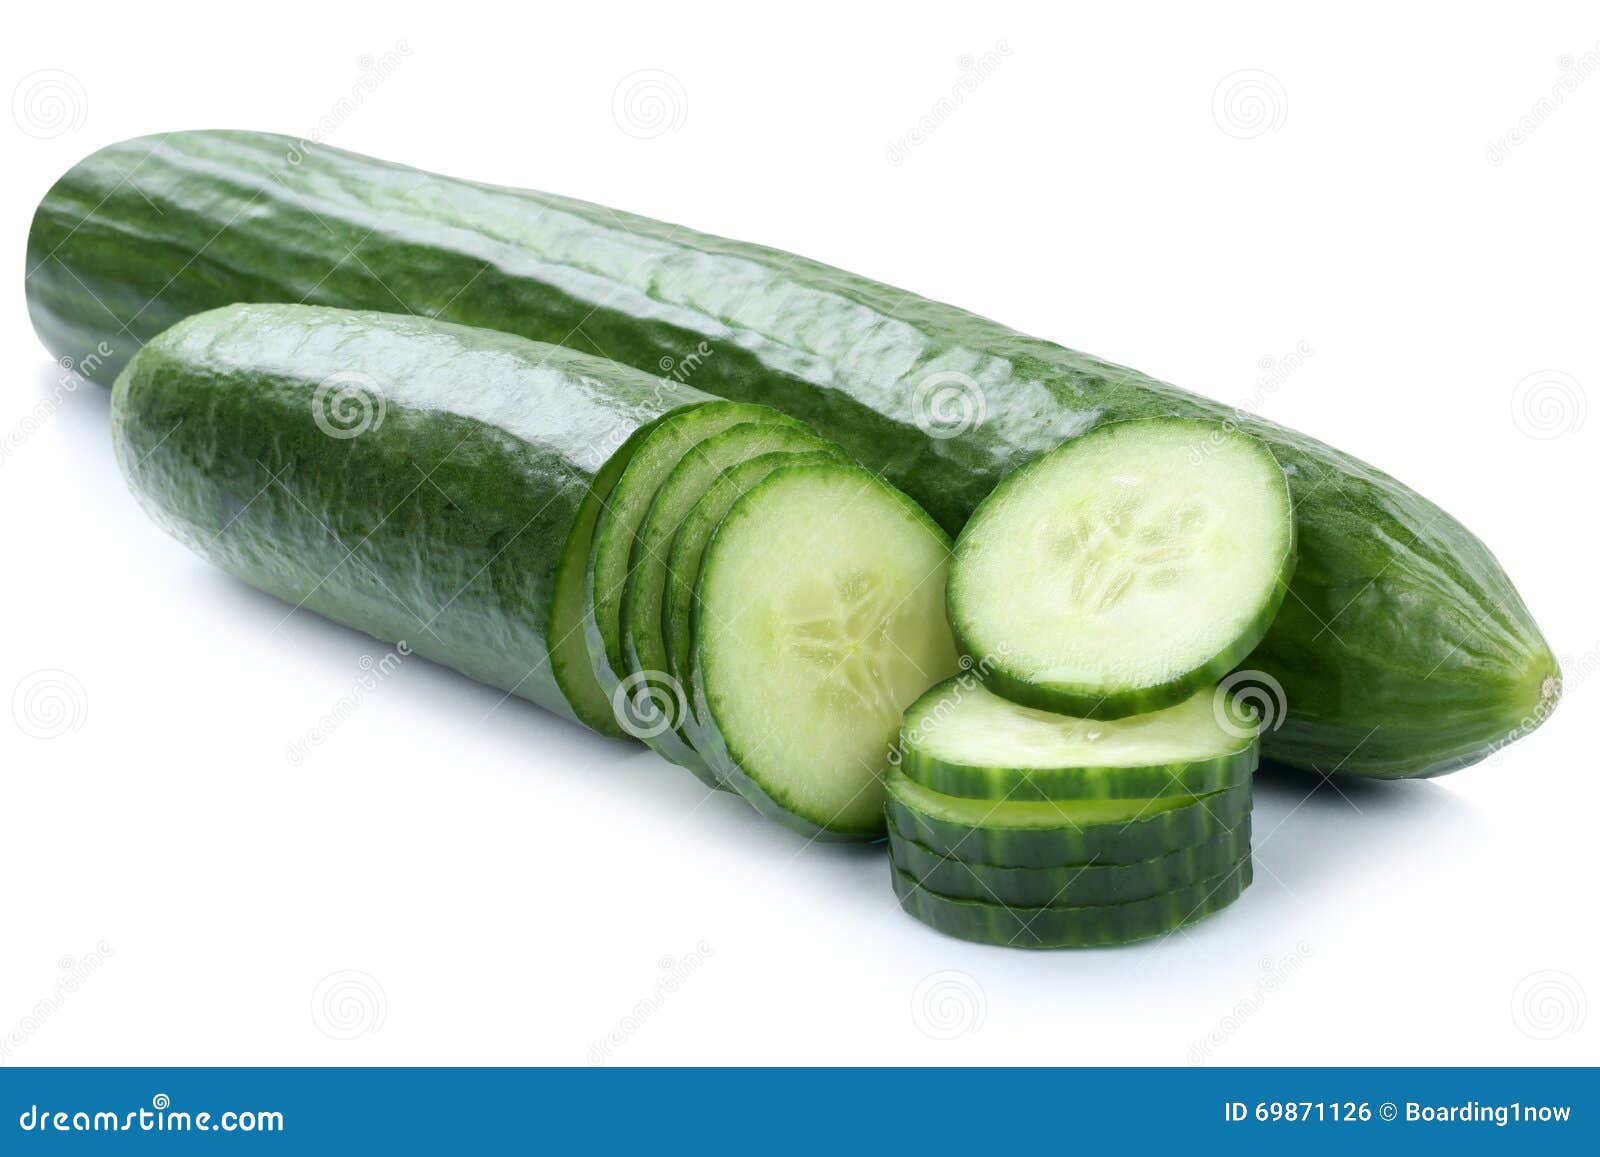 cucumber cucumbers vegetables sliced  on white